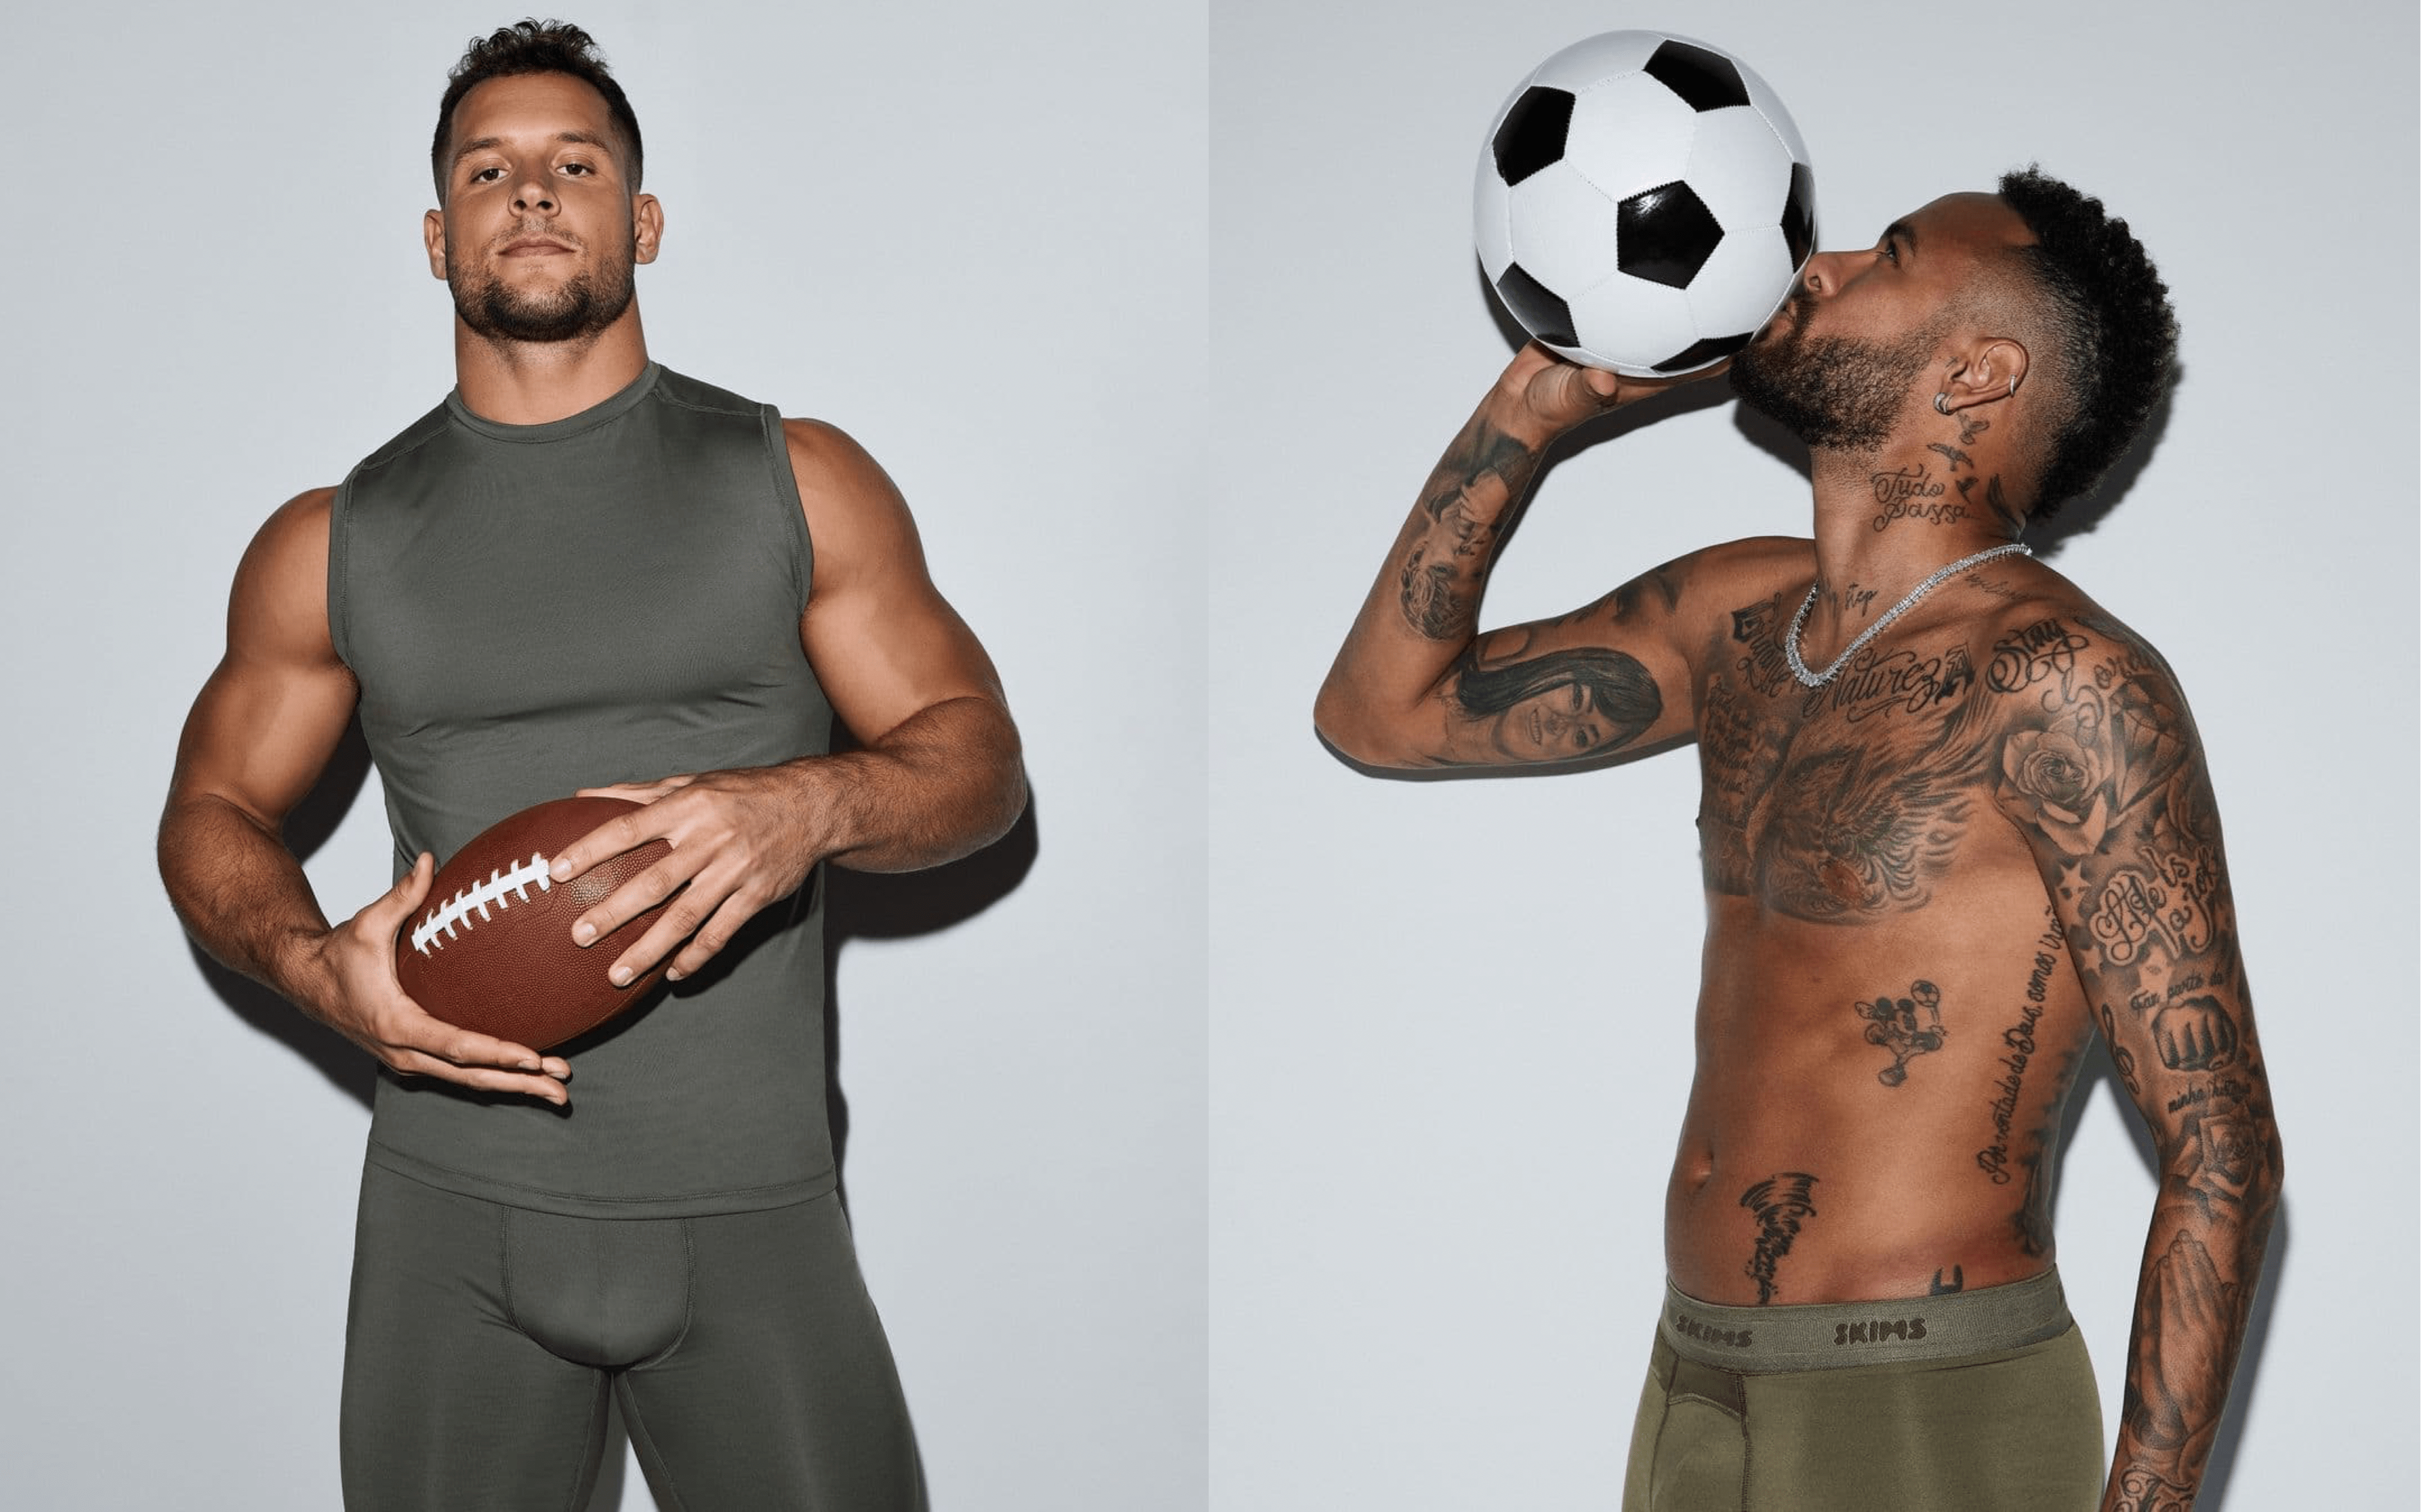 Skims launches menswear line with Neymar campaign